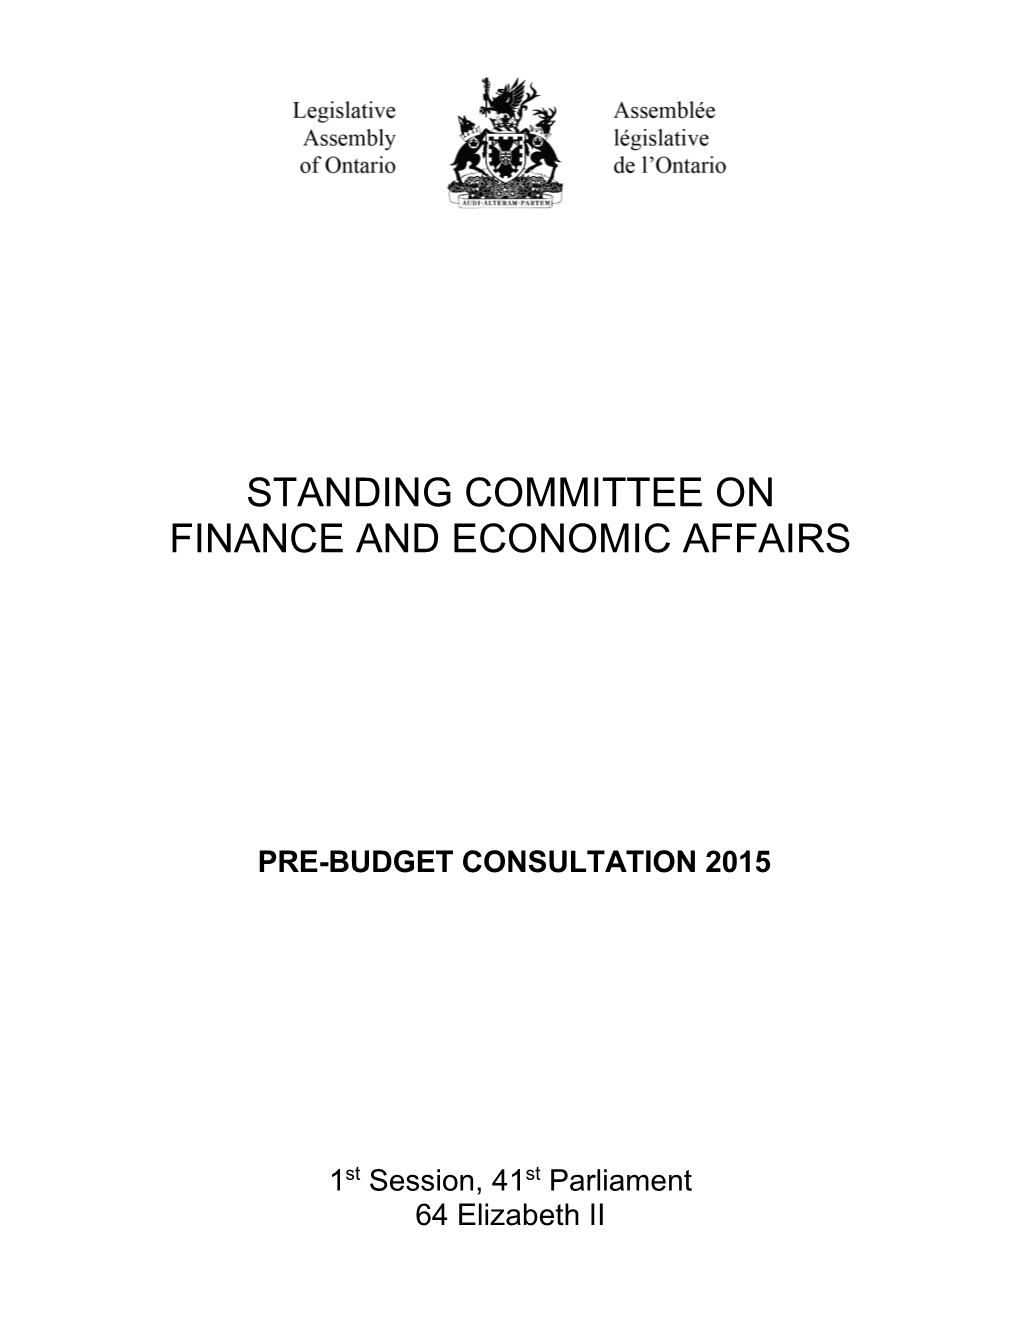 Standing Committee on Finance and Economic Affairs